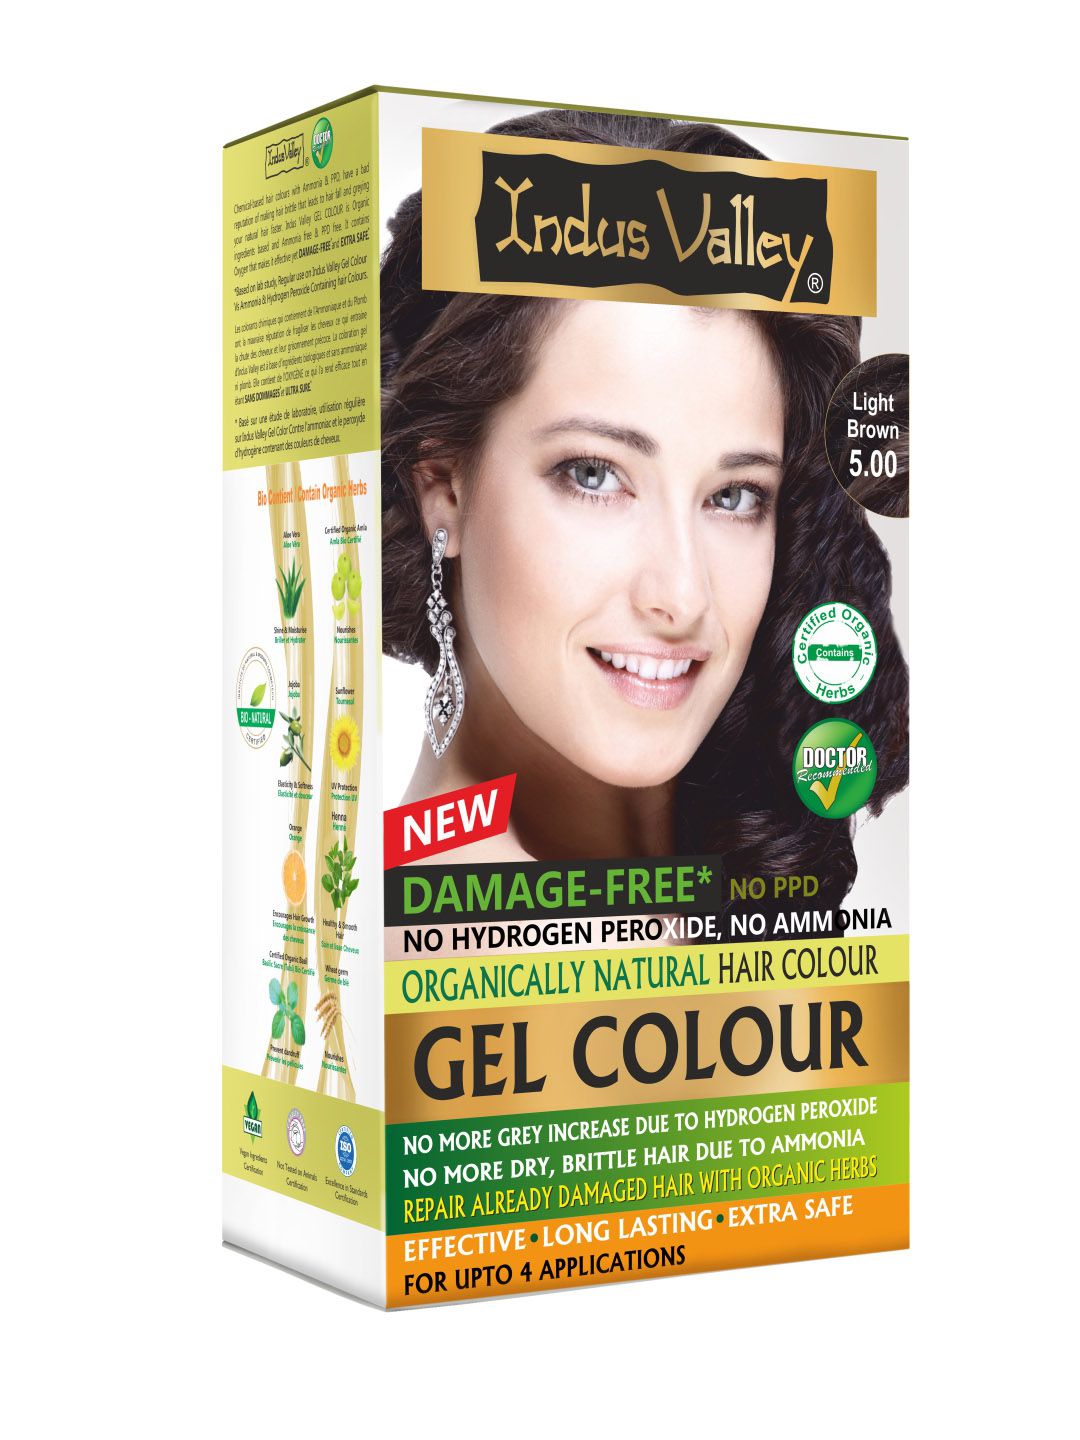 Indus Valley Organically Natural Gel Light Brown 5.0 Hair Color Price in India